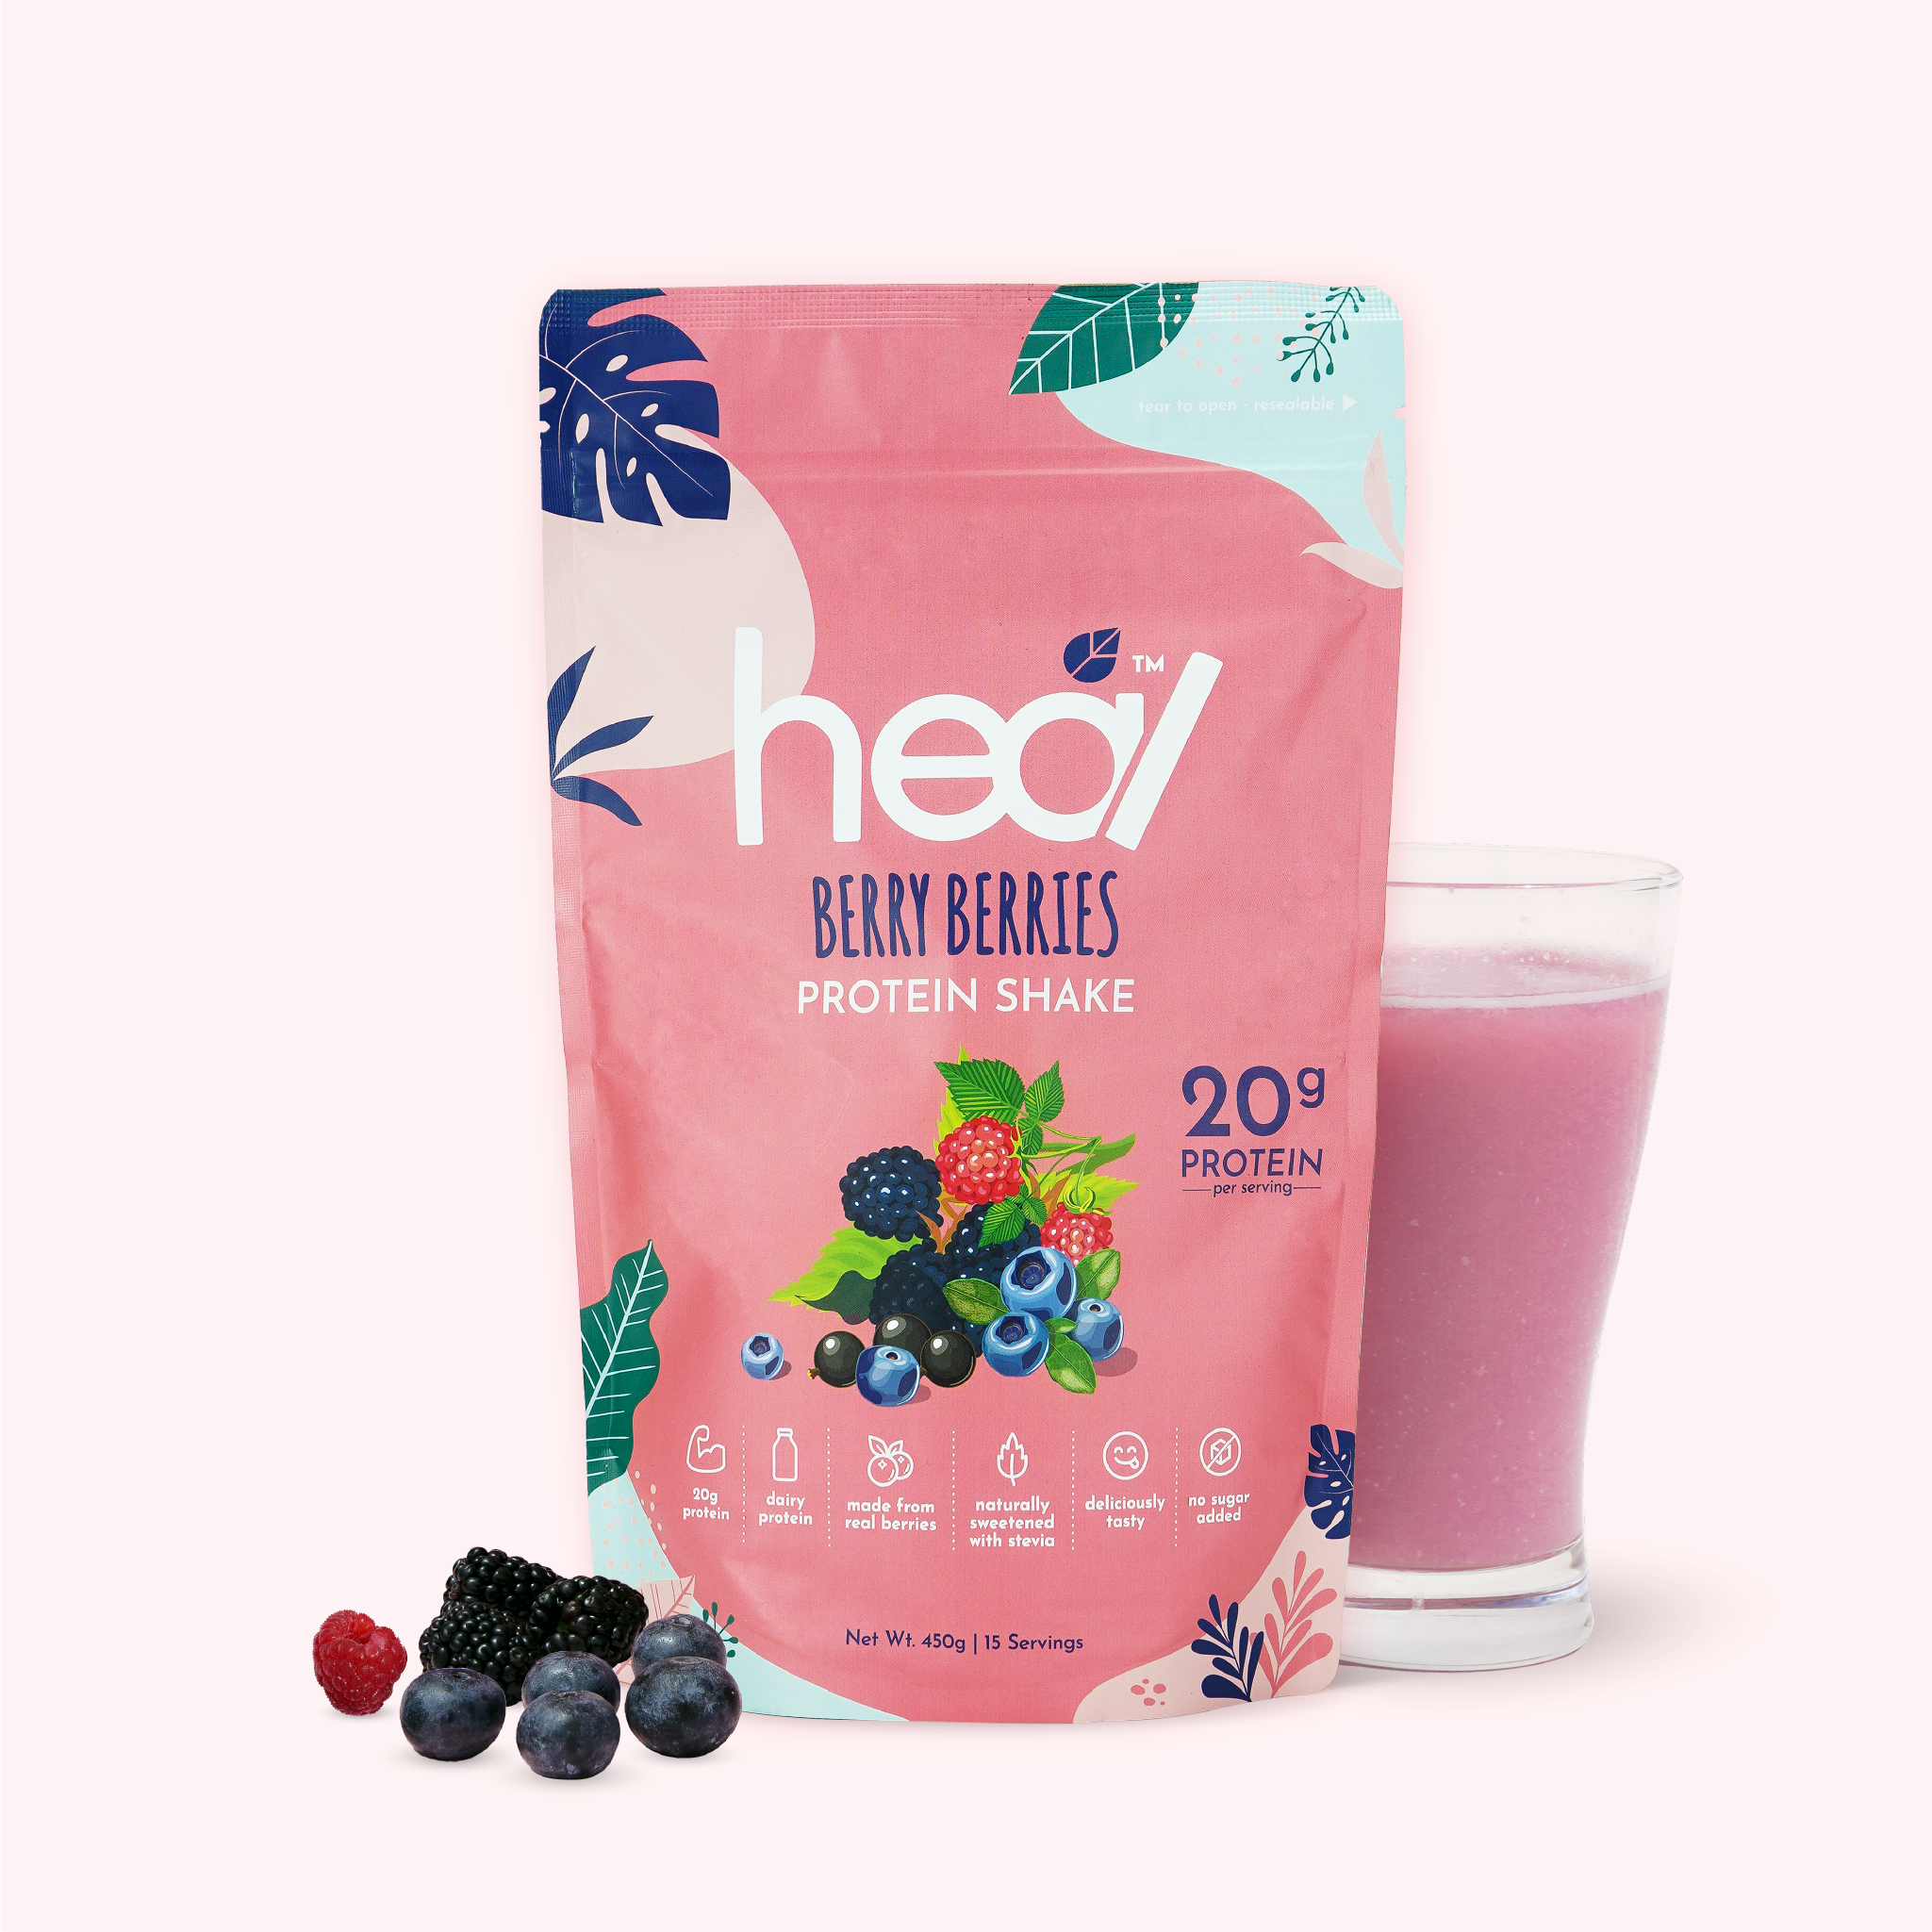 [Subscription Plan] Heal Berry Berries Protein Shake, 15 Servings Value Pack